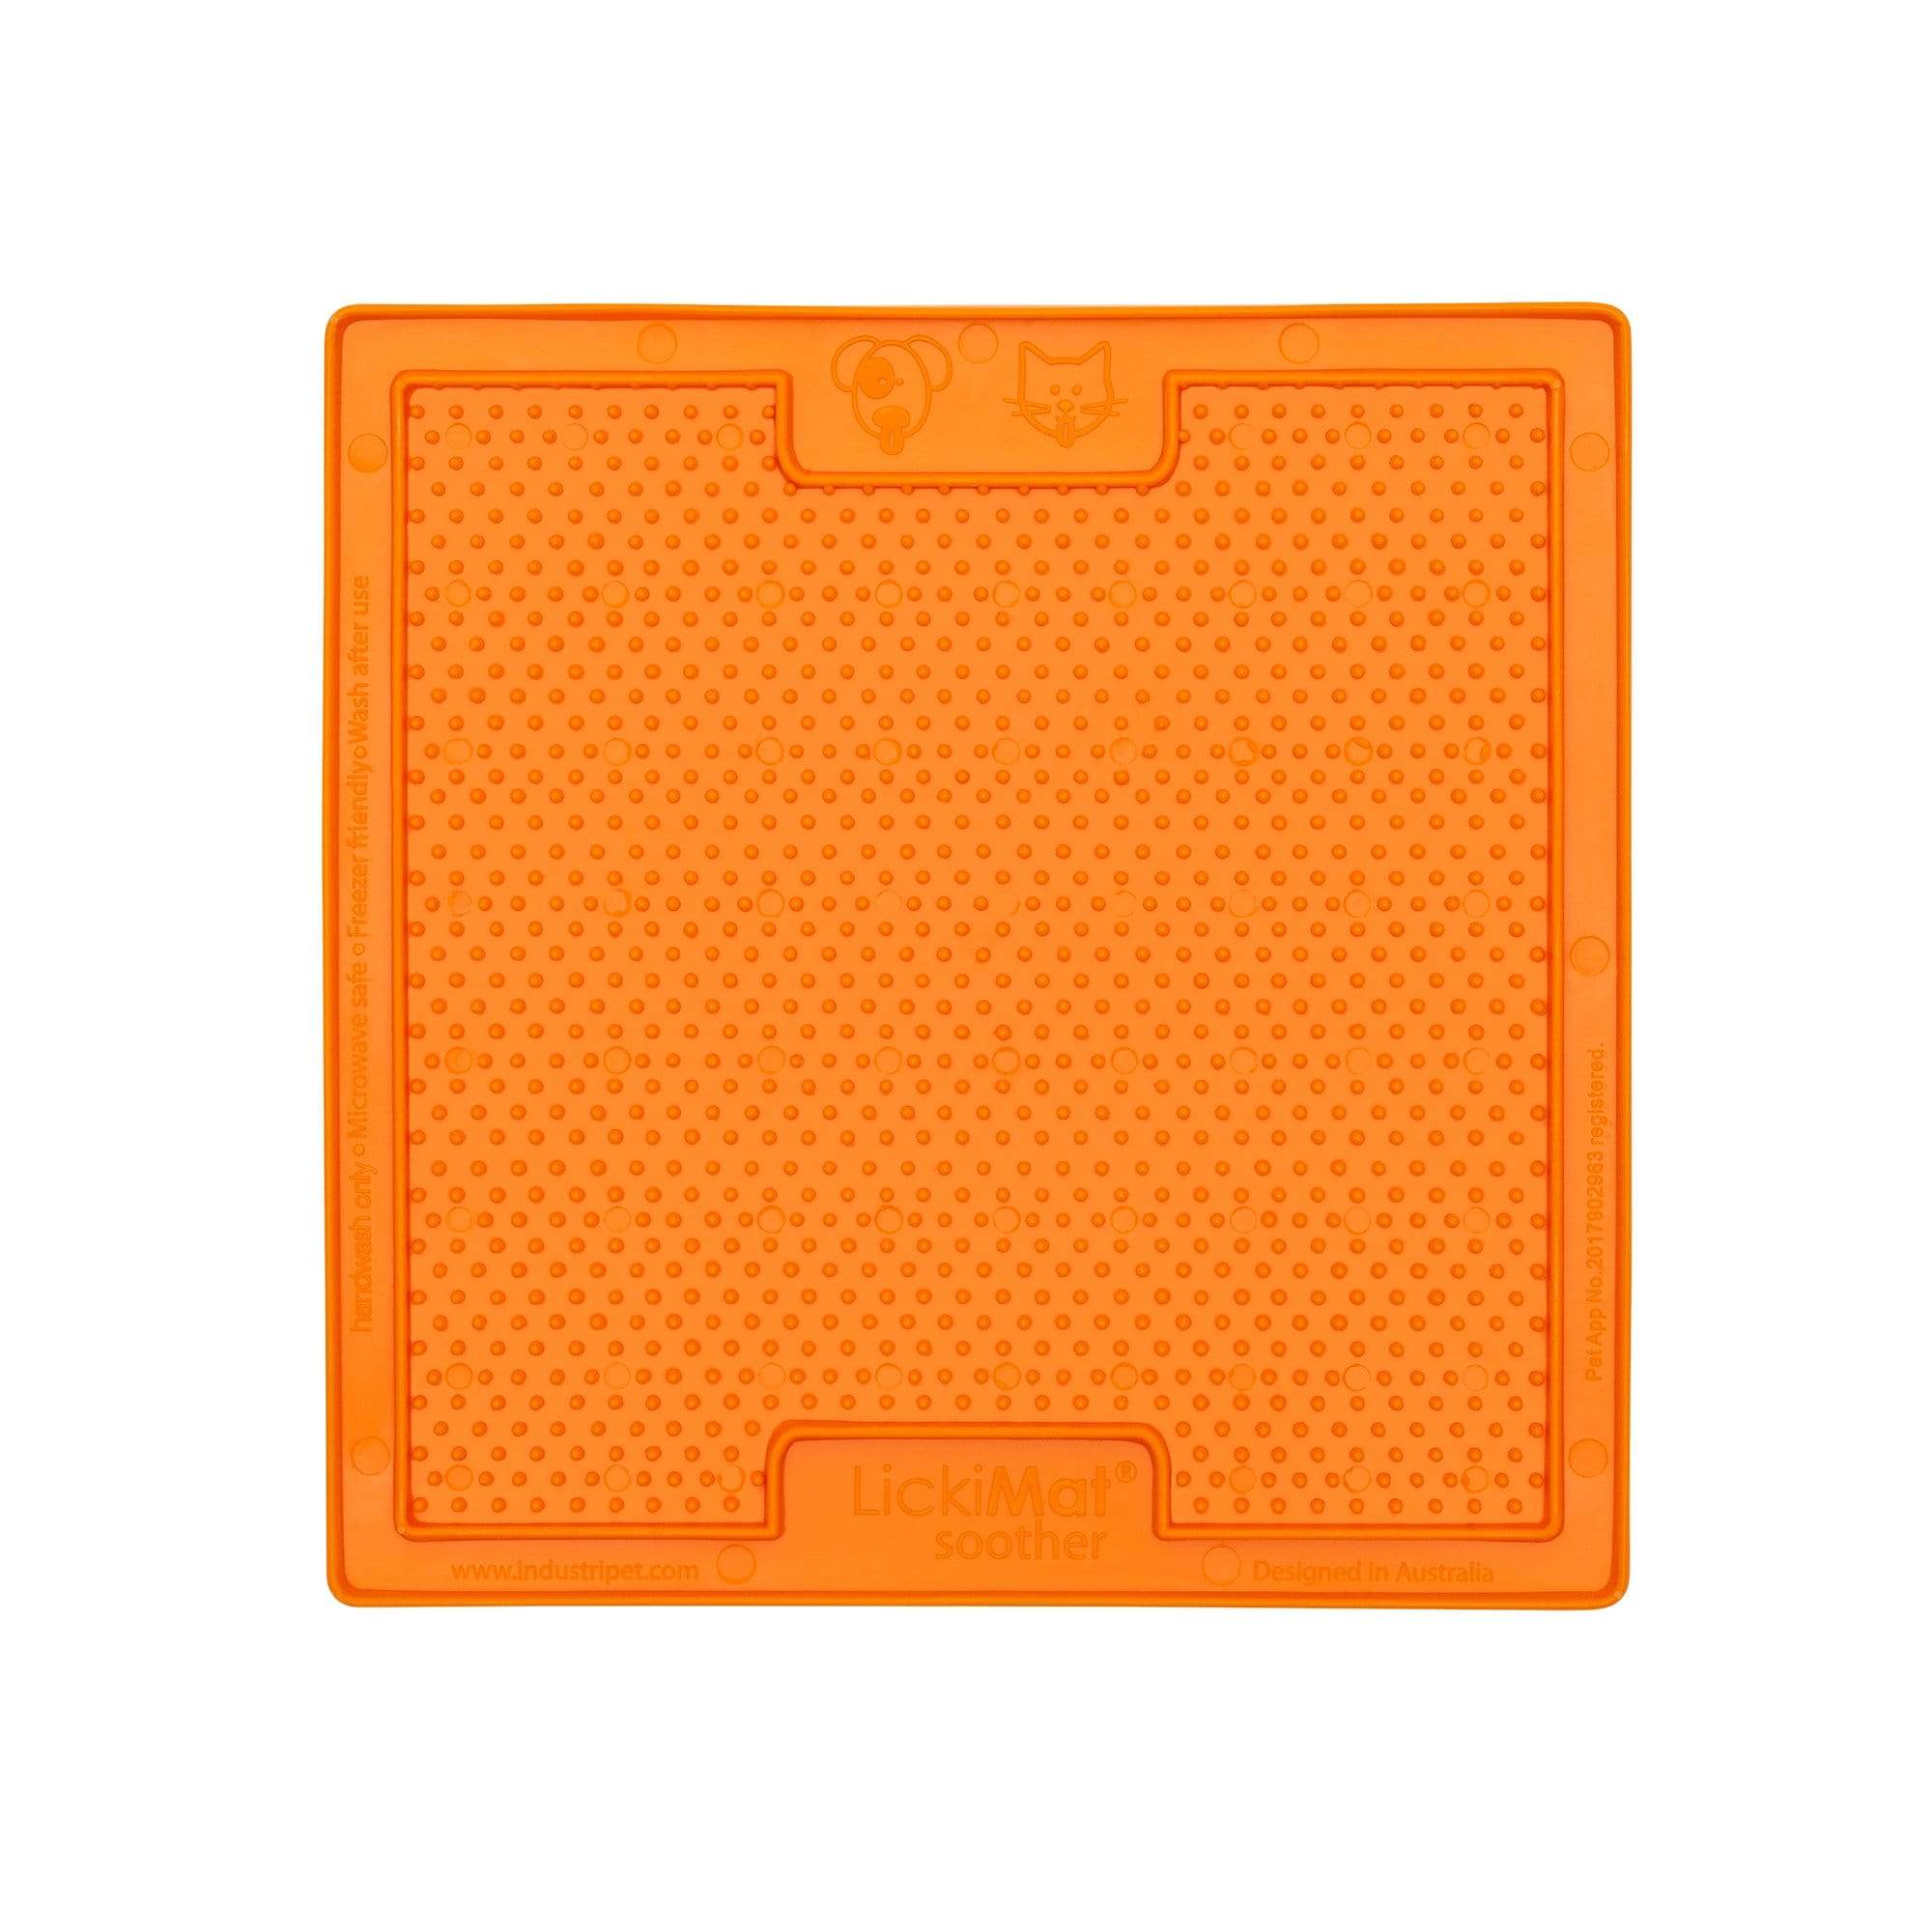 https://cdn.shopify.com/s/files/1/1733/0973/products/lickimat-pet-bowl-orange-lickimat-classic-soother-slow-feed-licking-mat-for-dogs-cats-28436496351431.jpg?v=1635133869